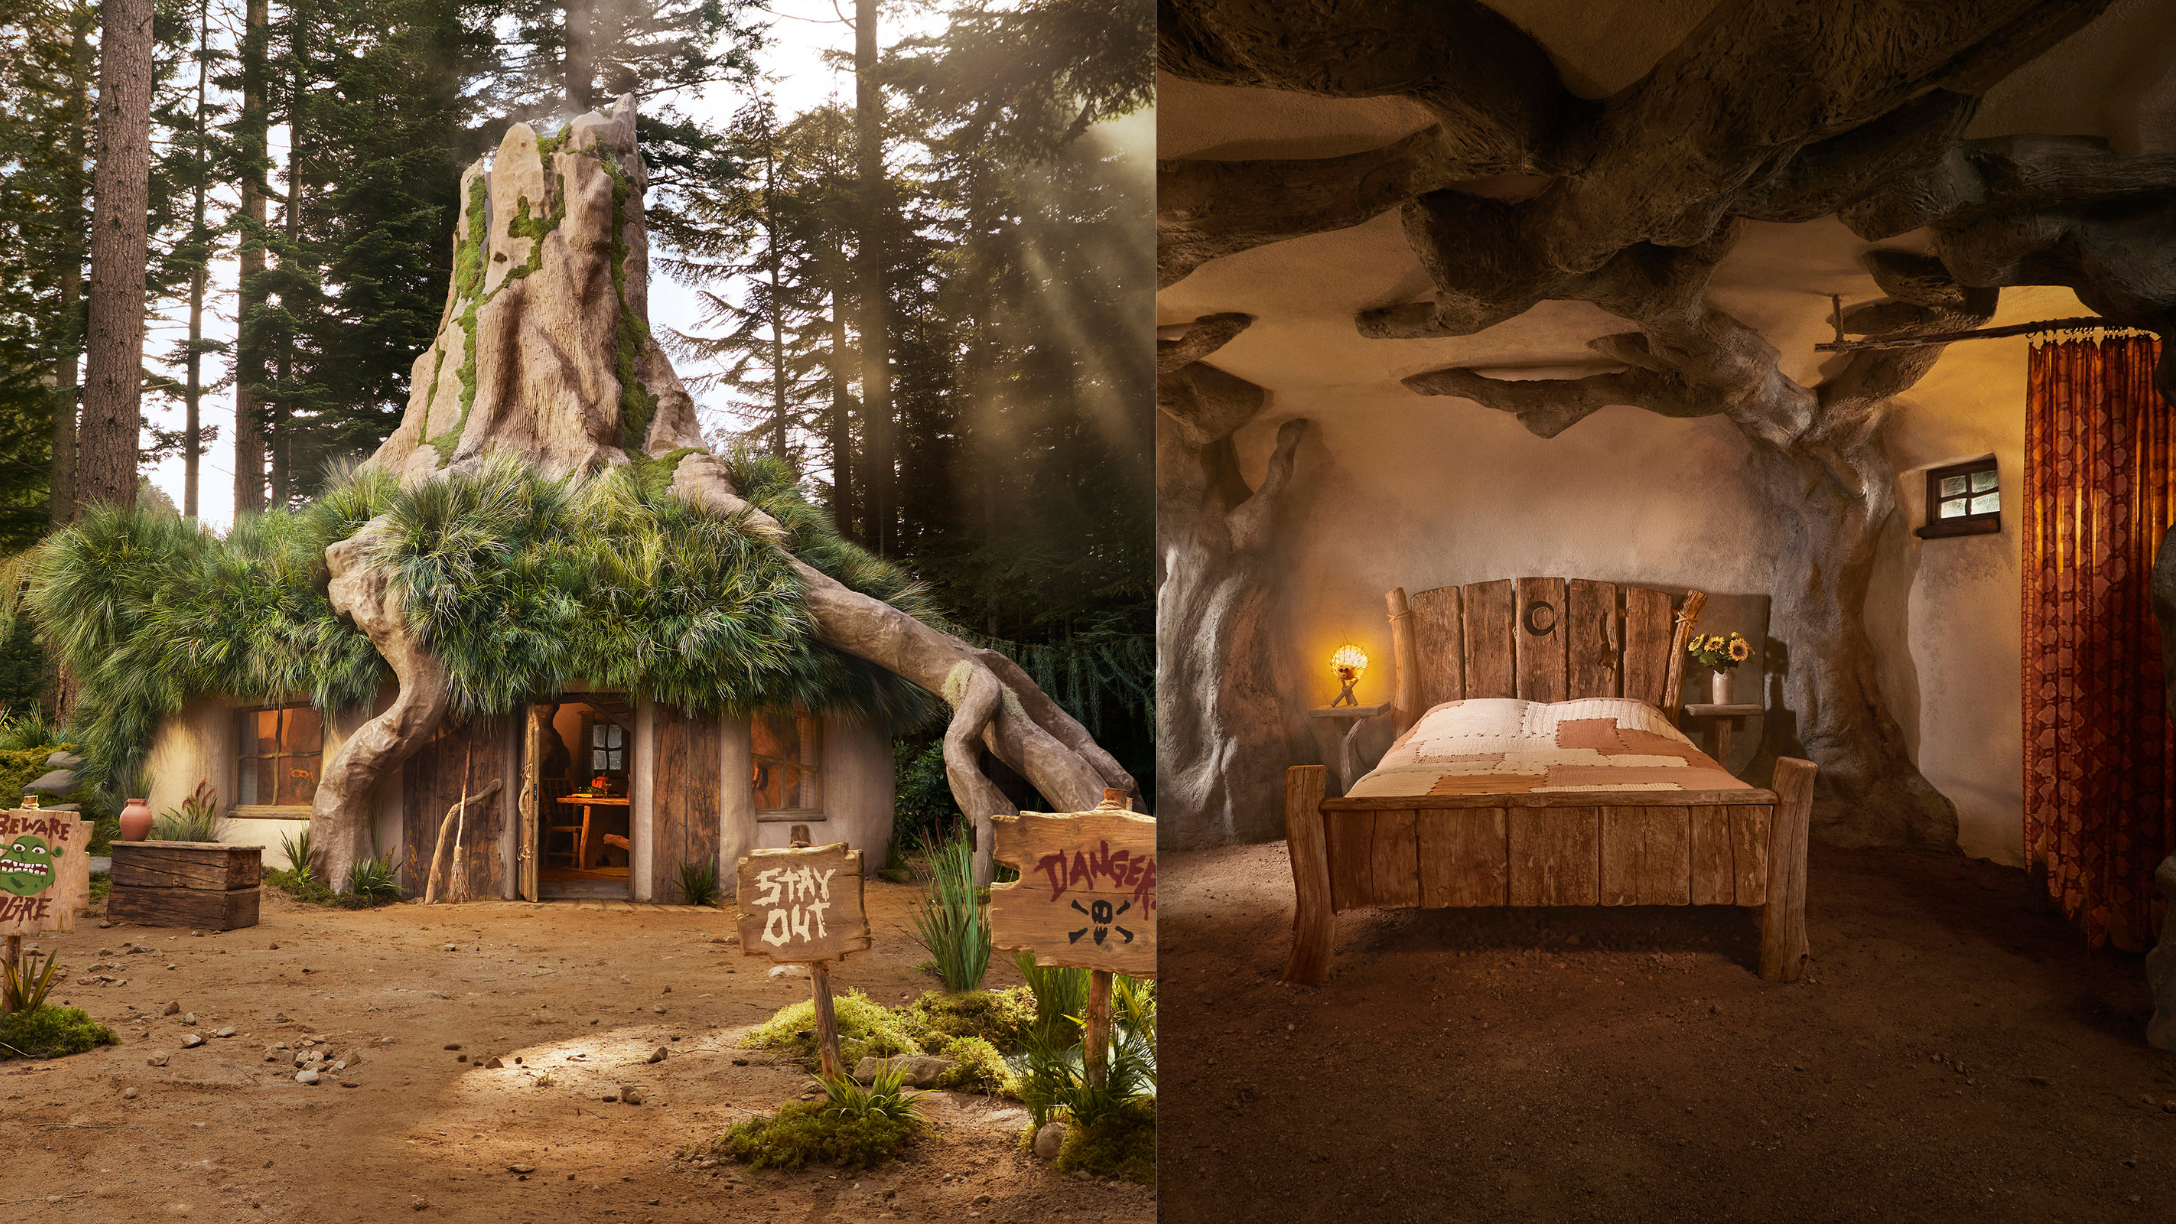 Airbnb Now Offering an Exclusive Weekend at 'Shrek's Swamp' With